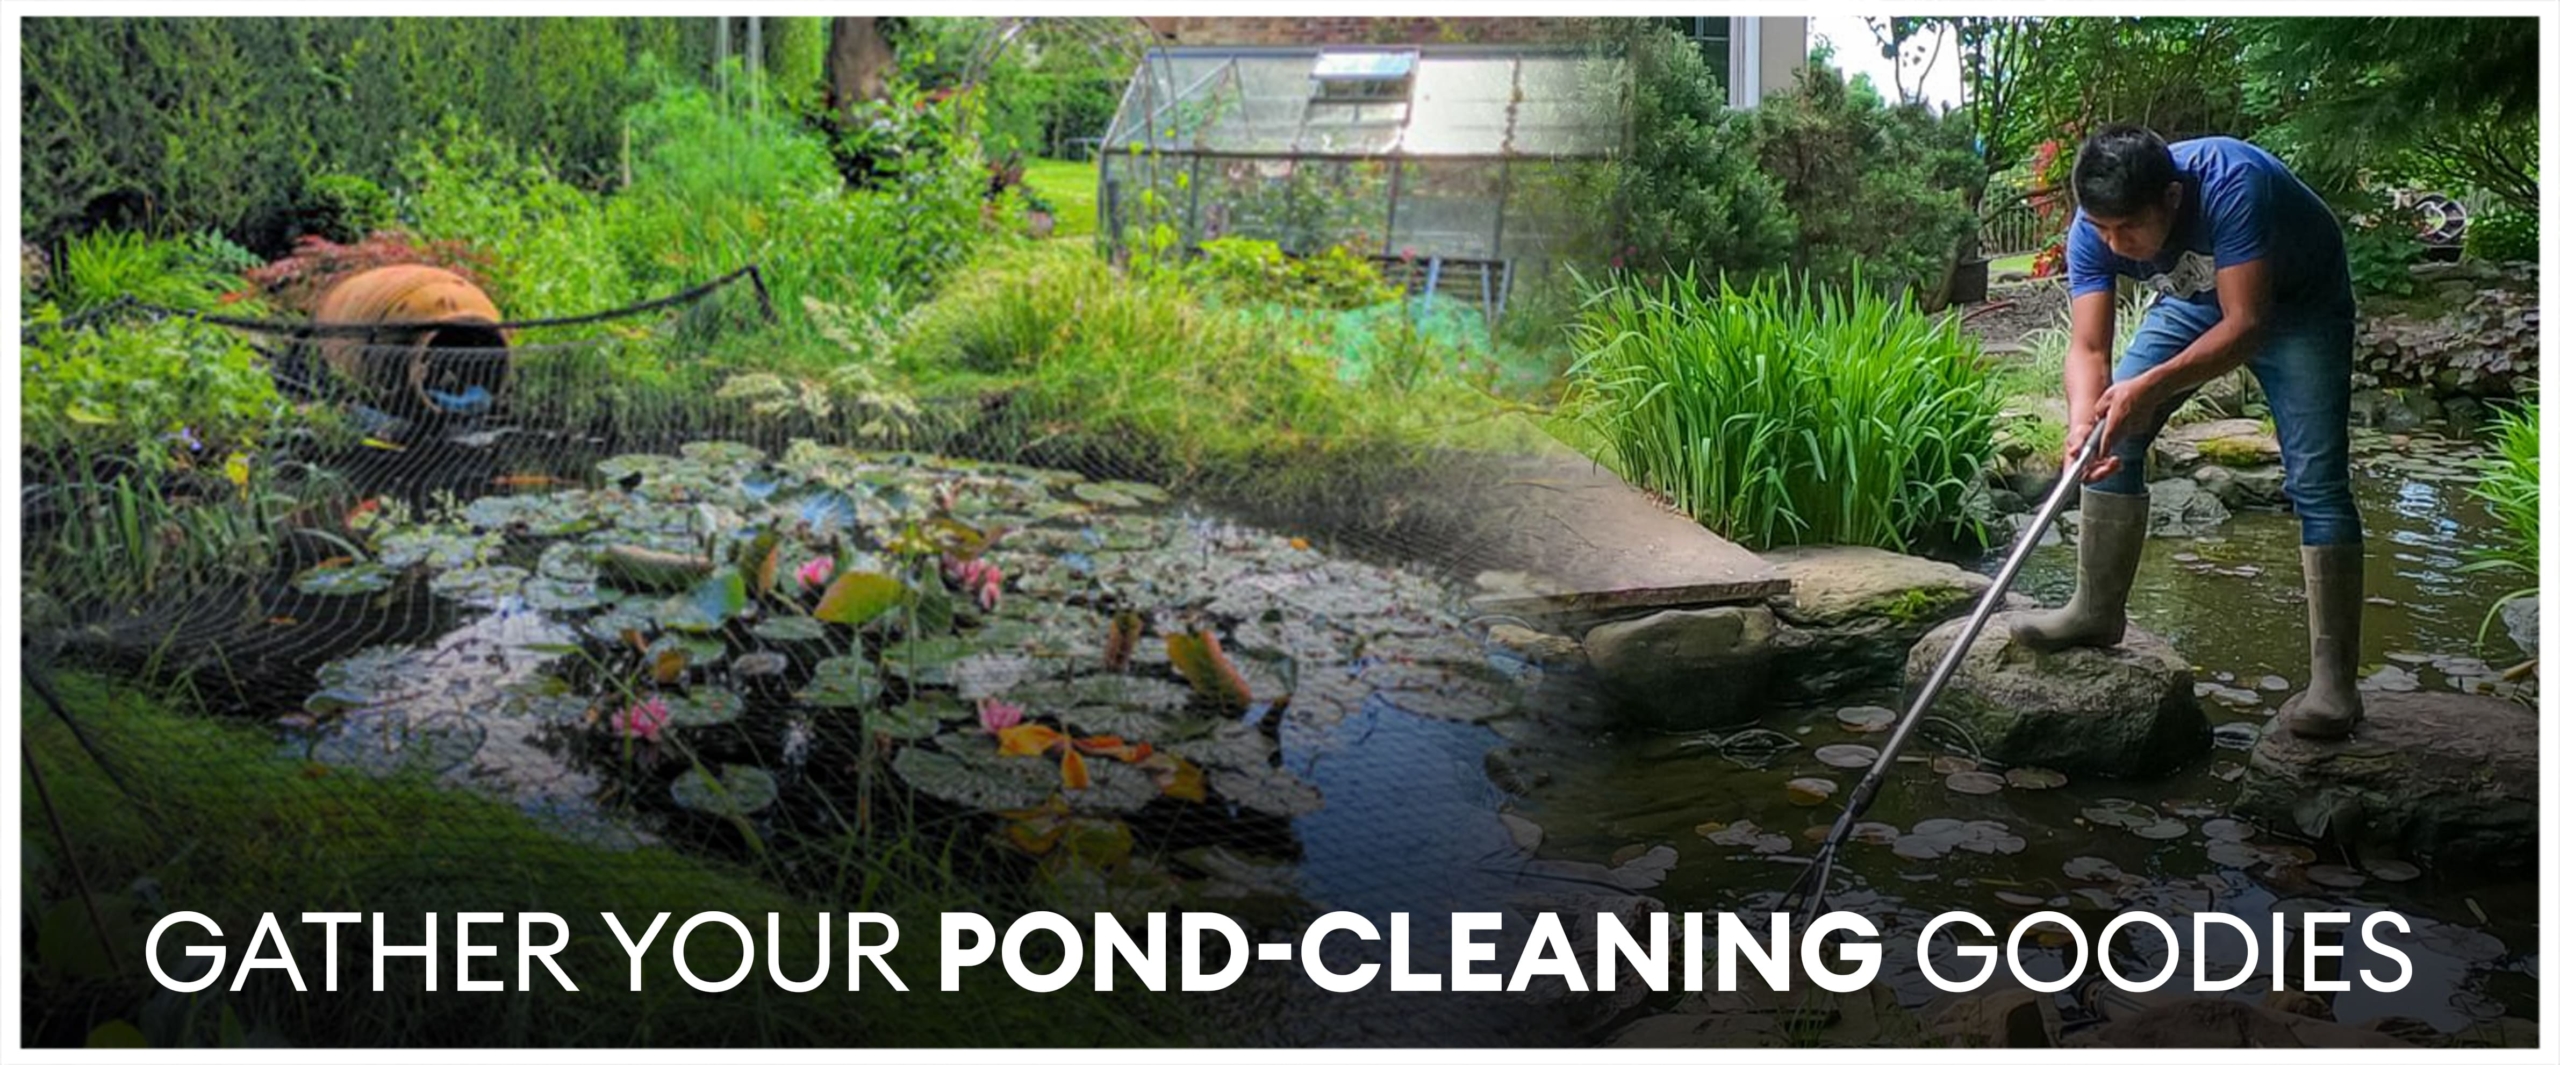 Gather Your Pond-Cleaning Goodies: